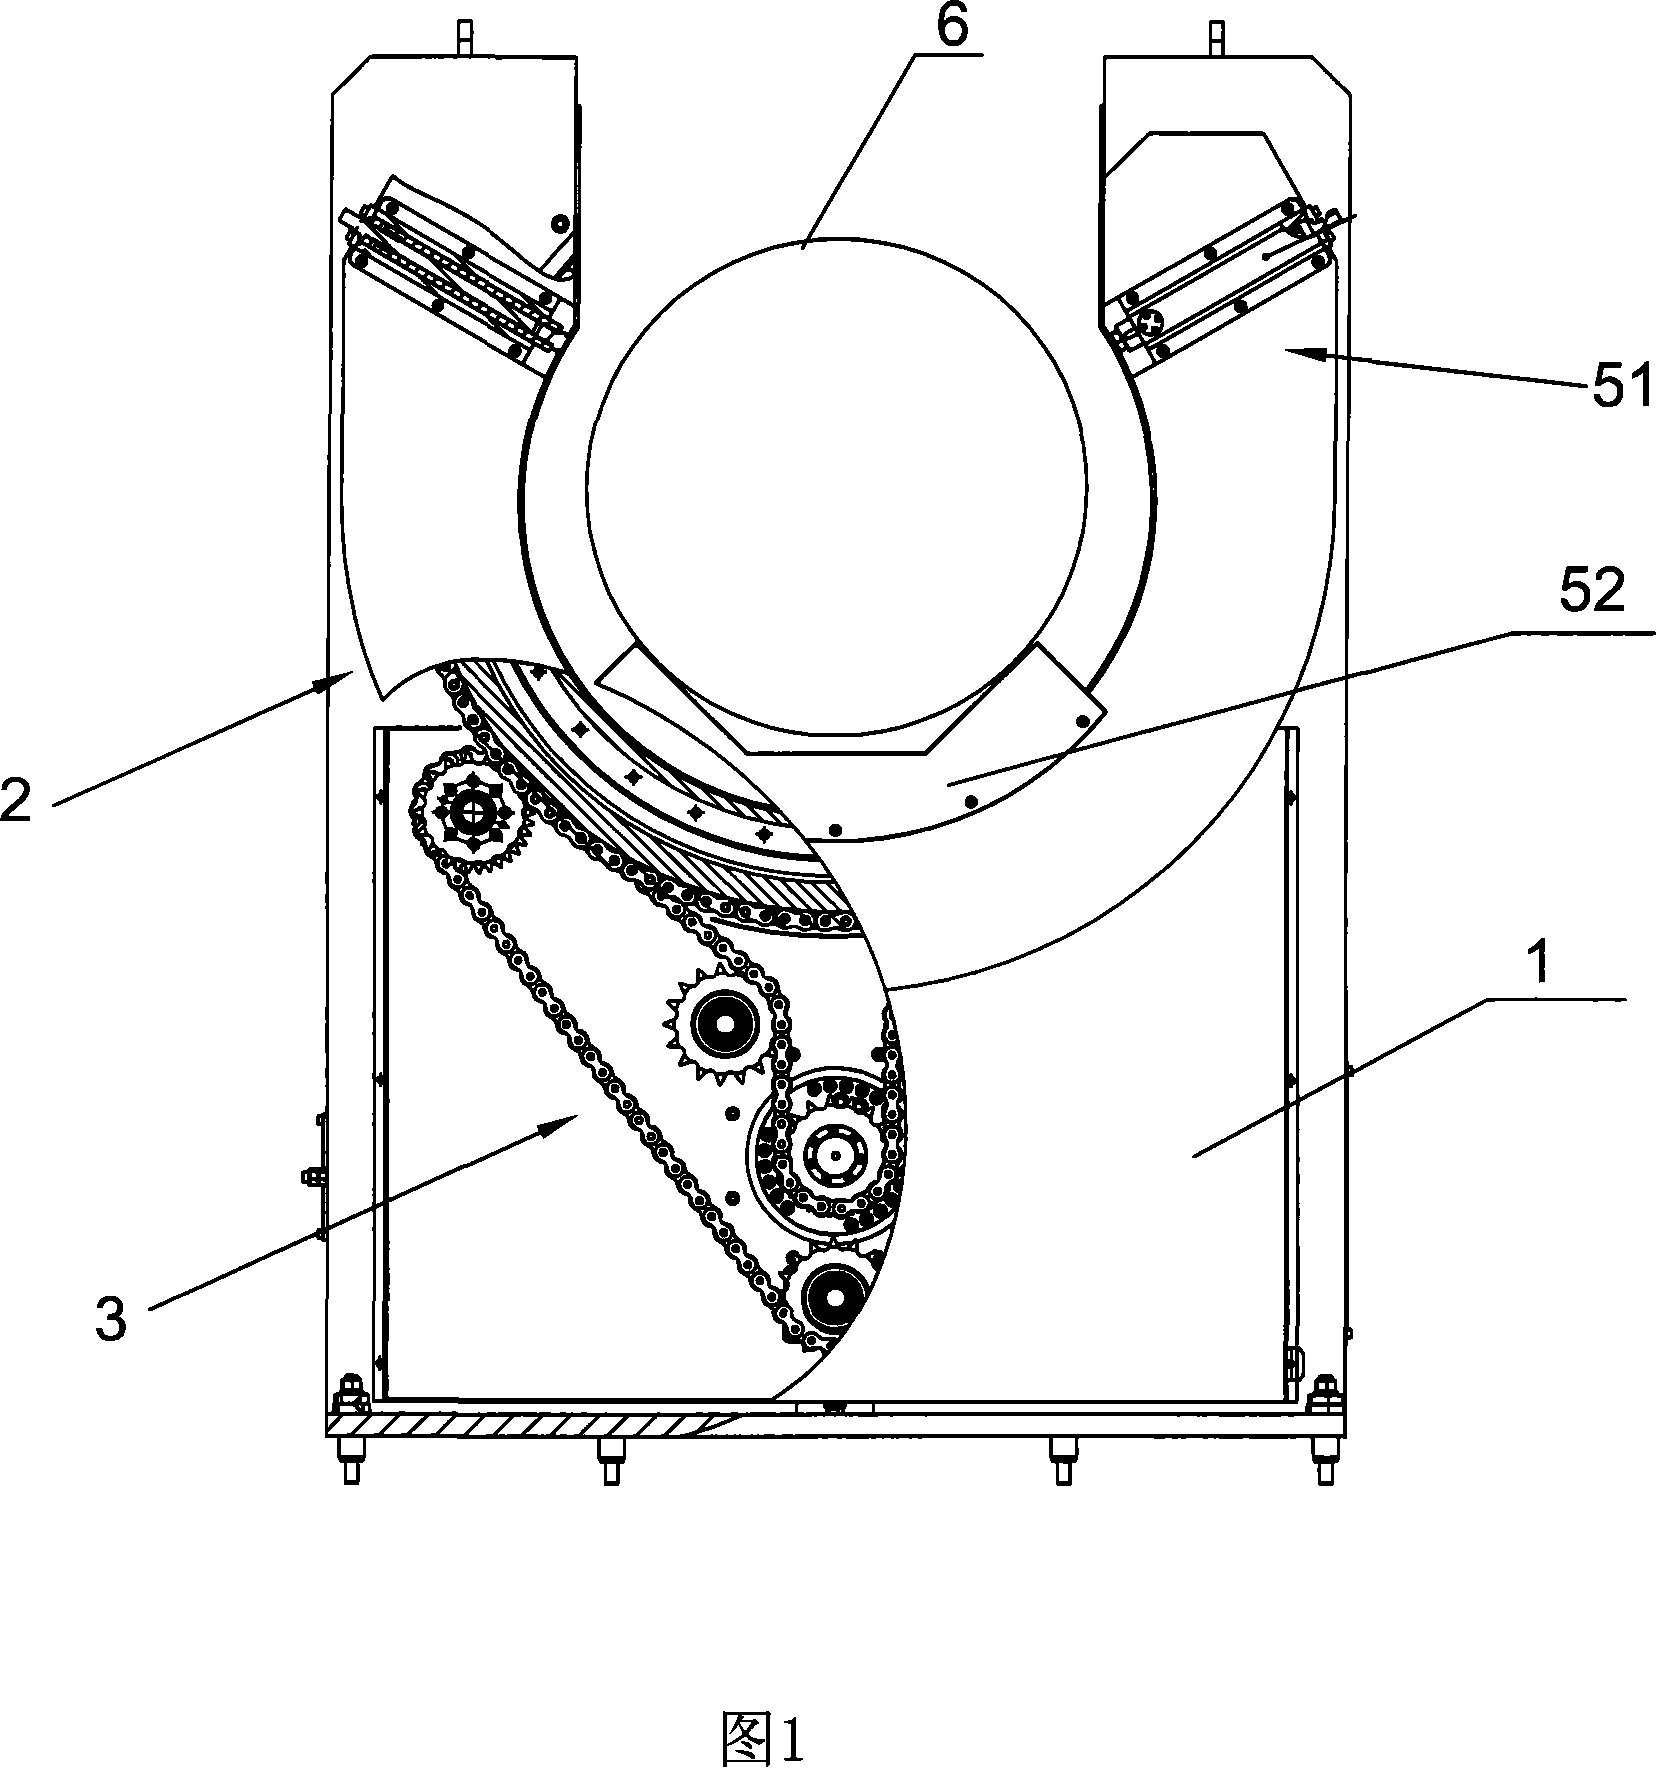 Pipe cutting positioner